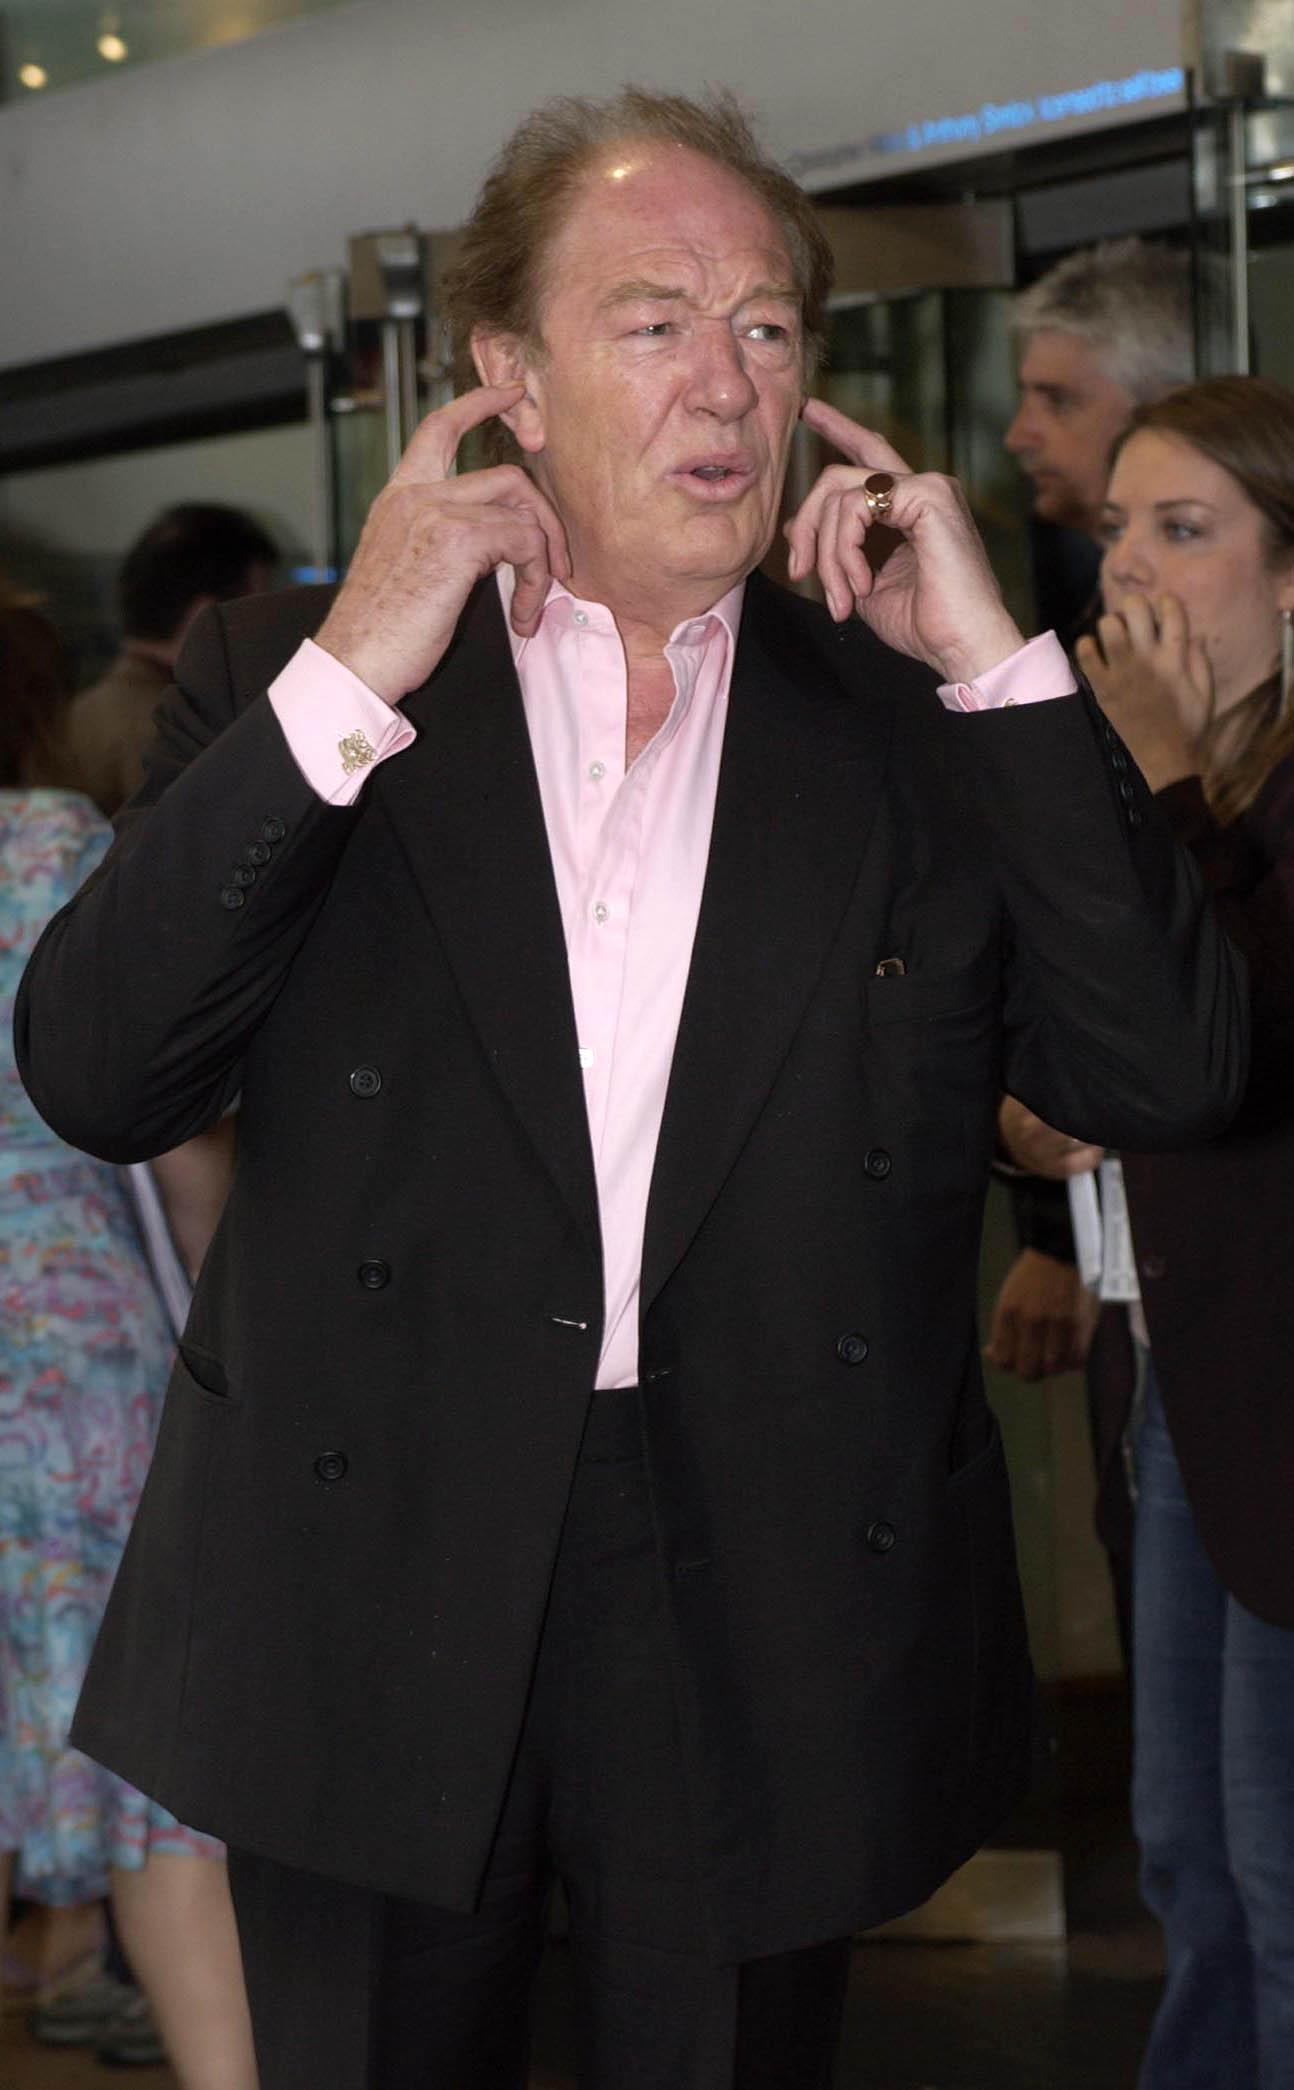 Michael Gambon at UK premiere of Harry Potter And The Prisoner of Azkaban in Central London | Source: Getty Images